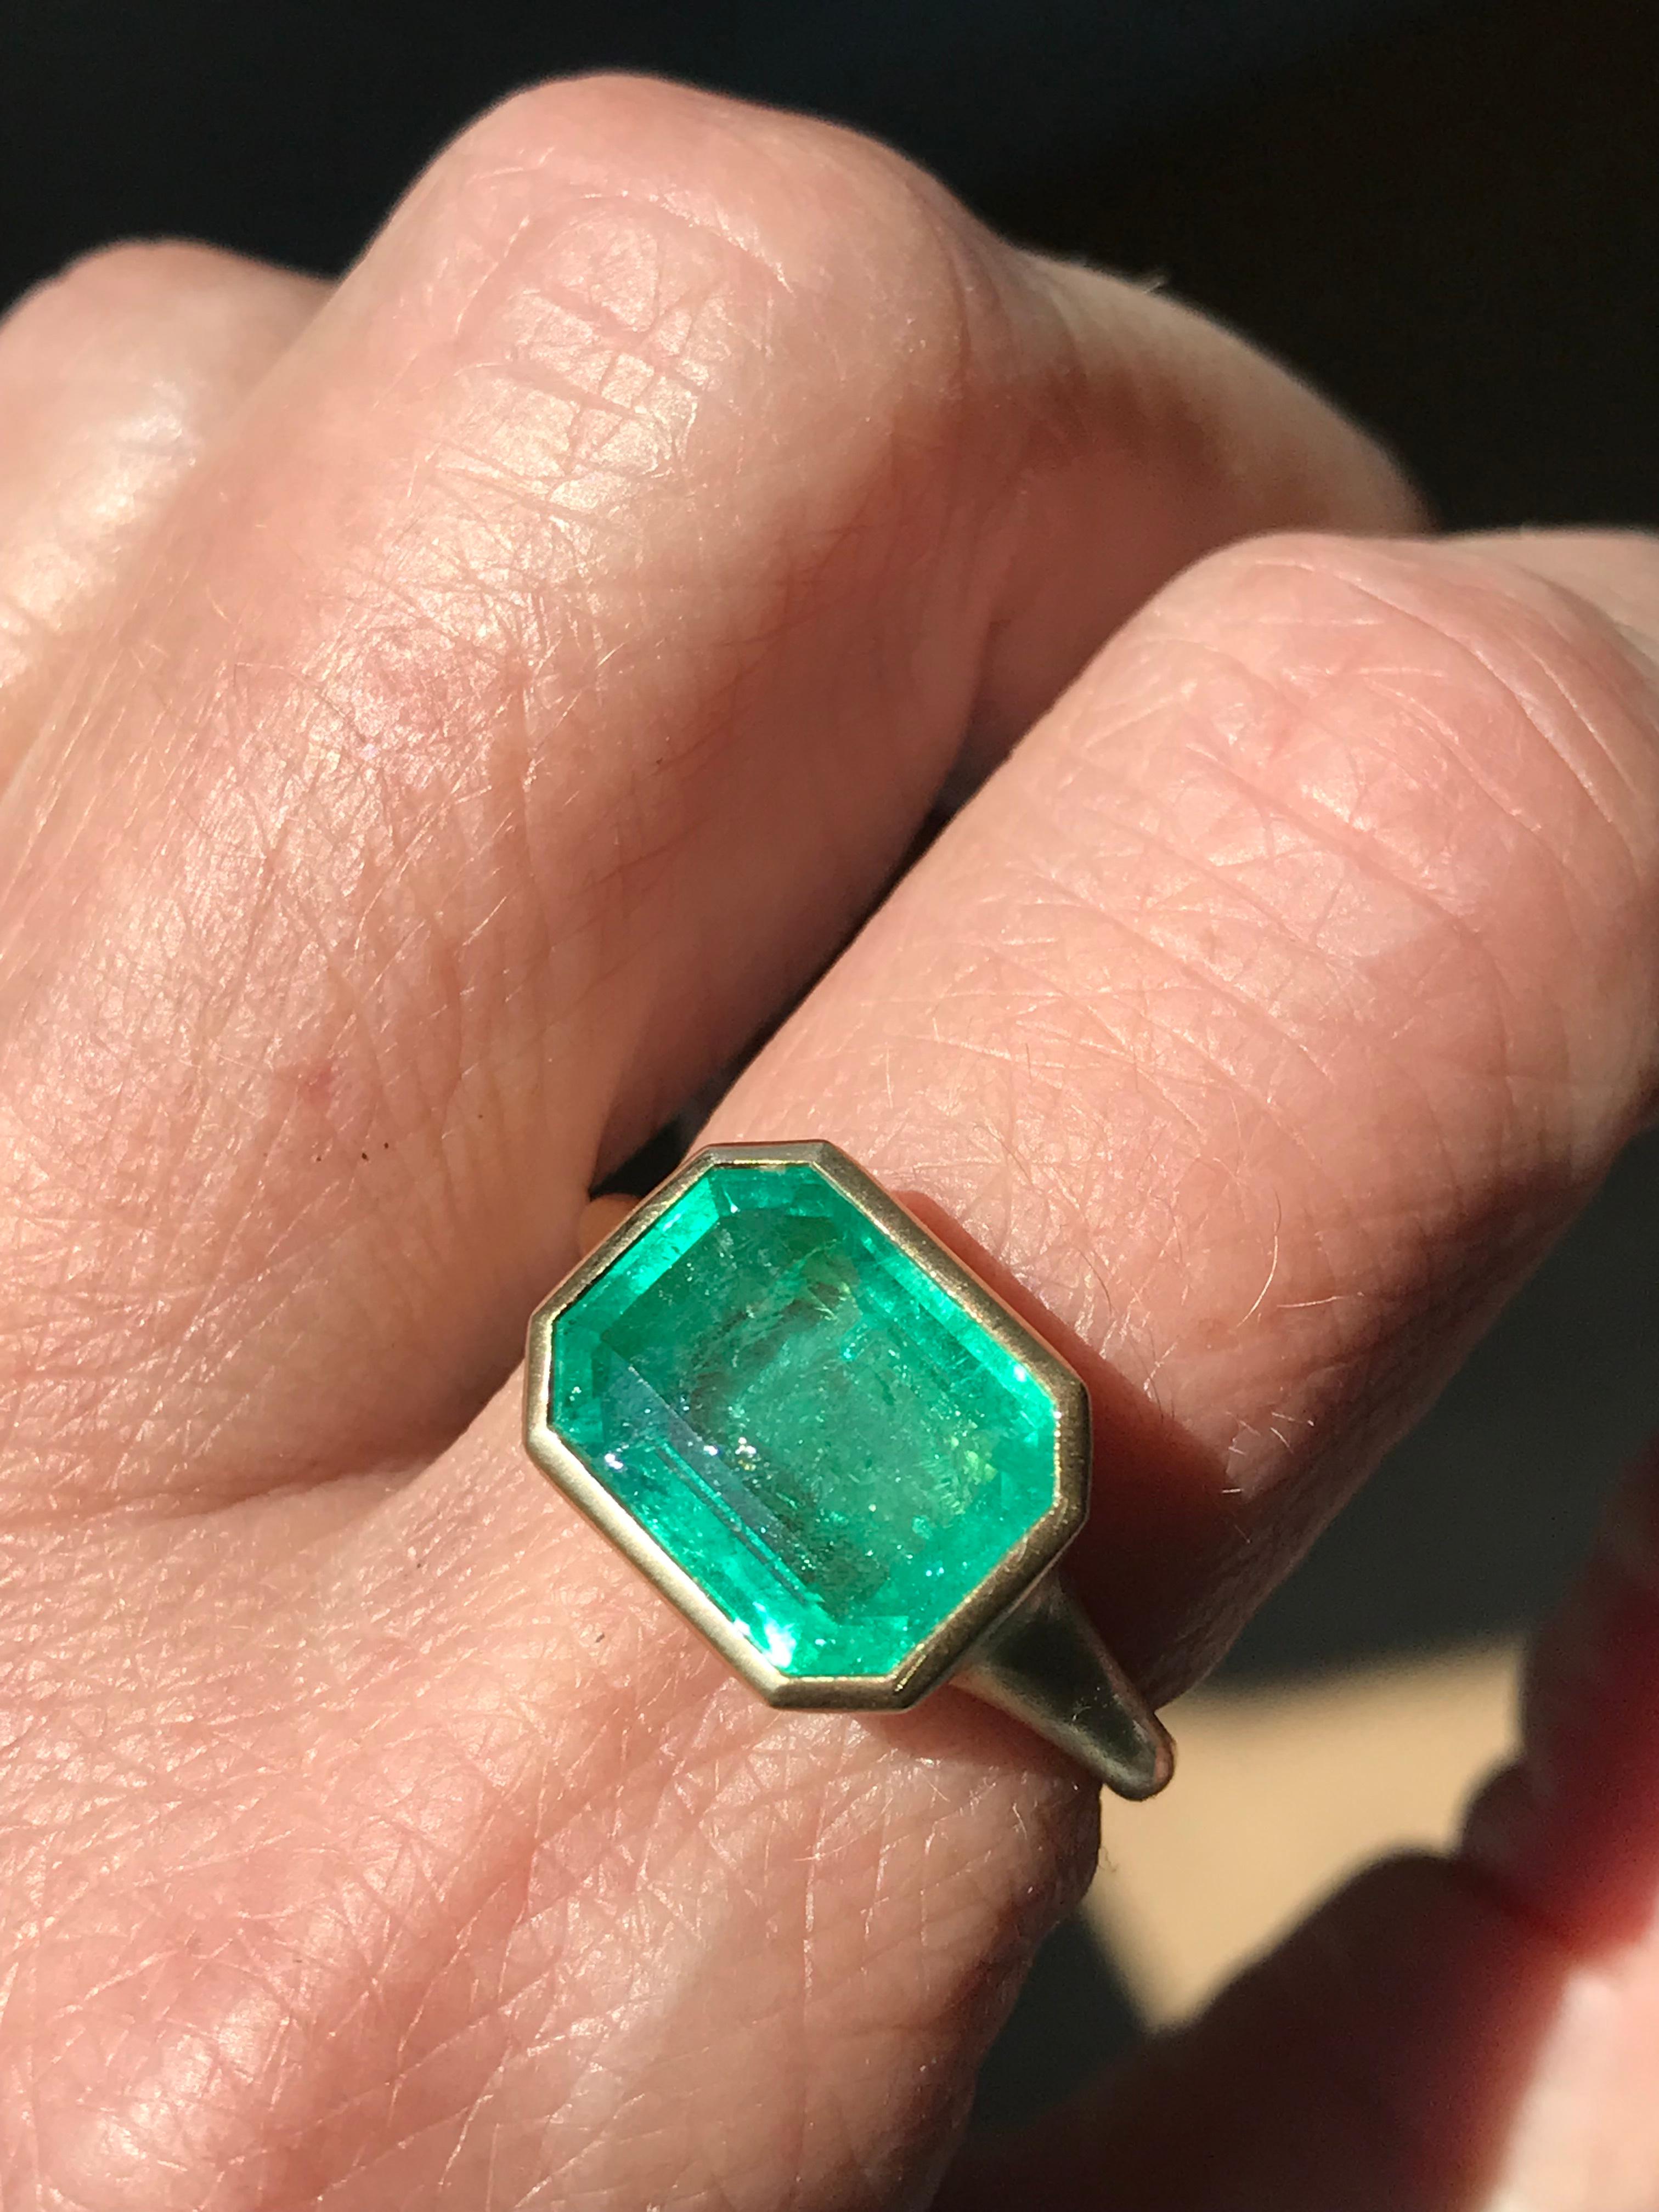 Dalben design One of a Kind 18k yellow gold satin finishing ring with a 4,3 carat bezel-set emerald cut emerald. 
Ring size 6 3/4  USA - EU 53 re-sizable to most finger sizes. 
Bezel stone dimensions :
width 13 mm
height 10,3 mm
The ring has been